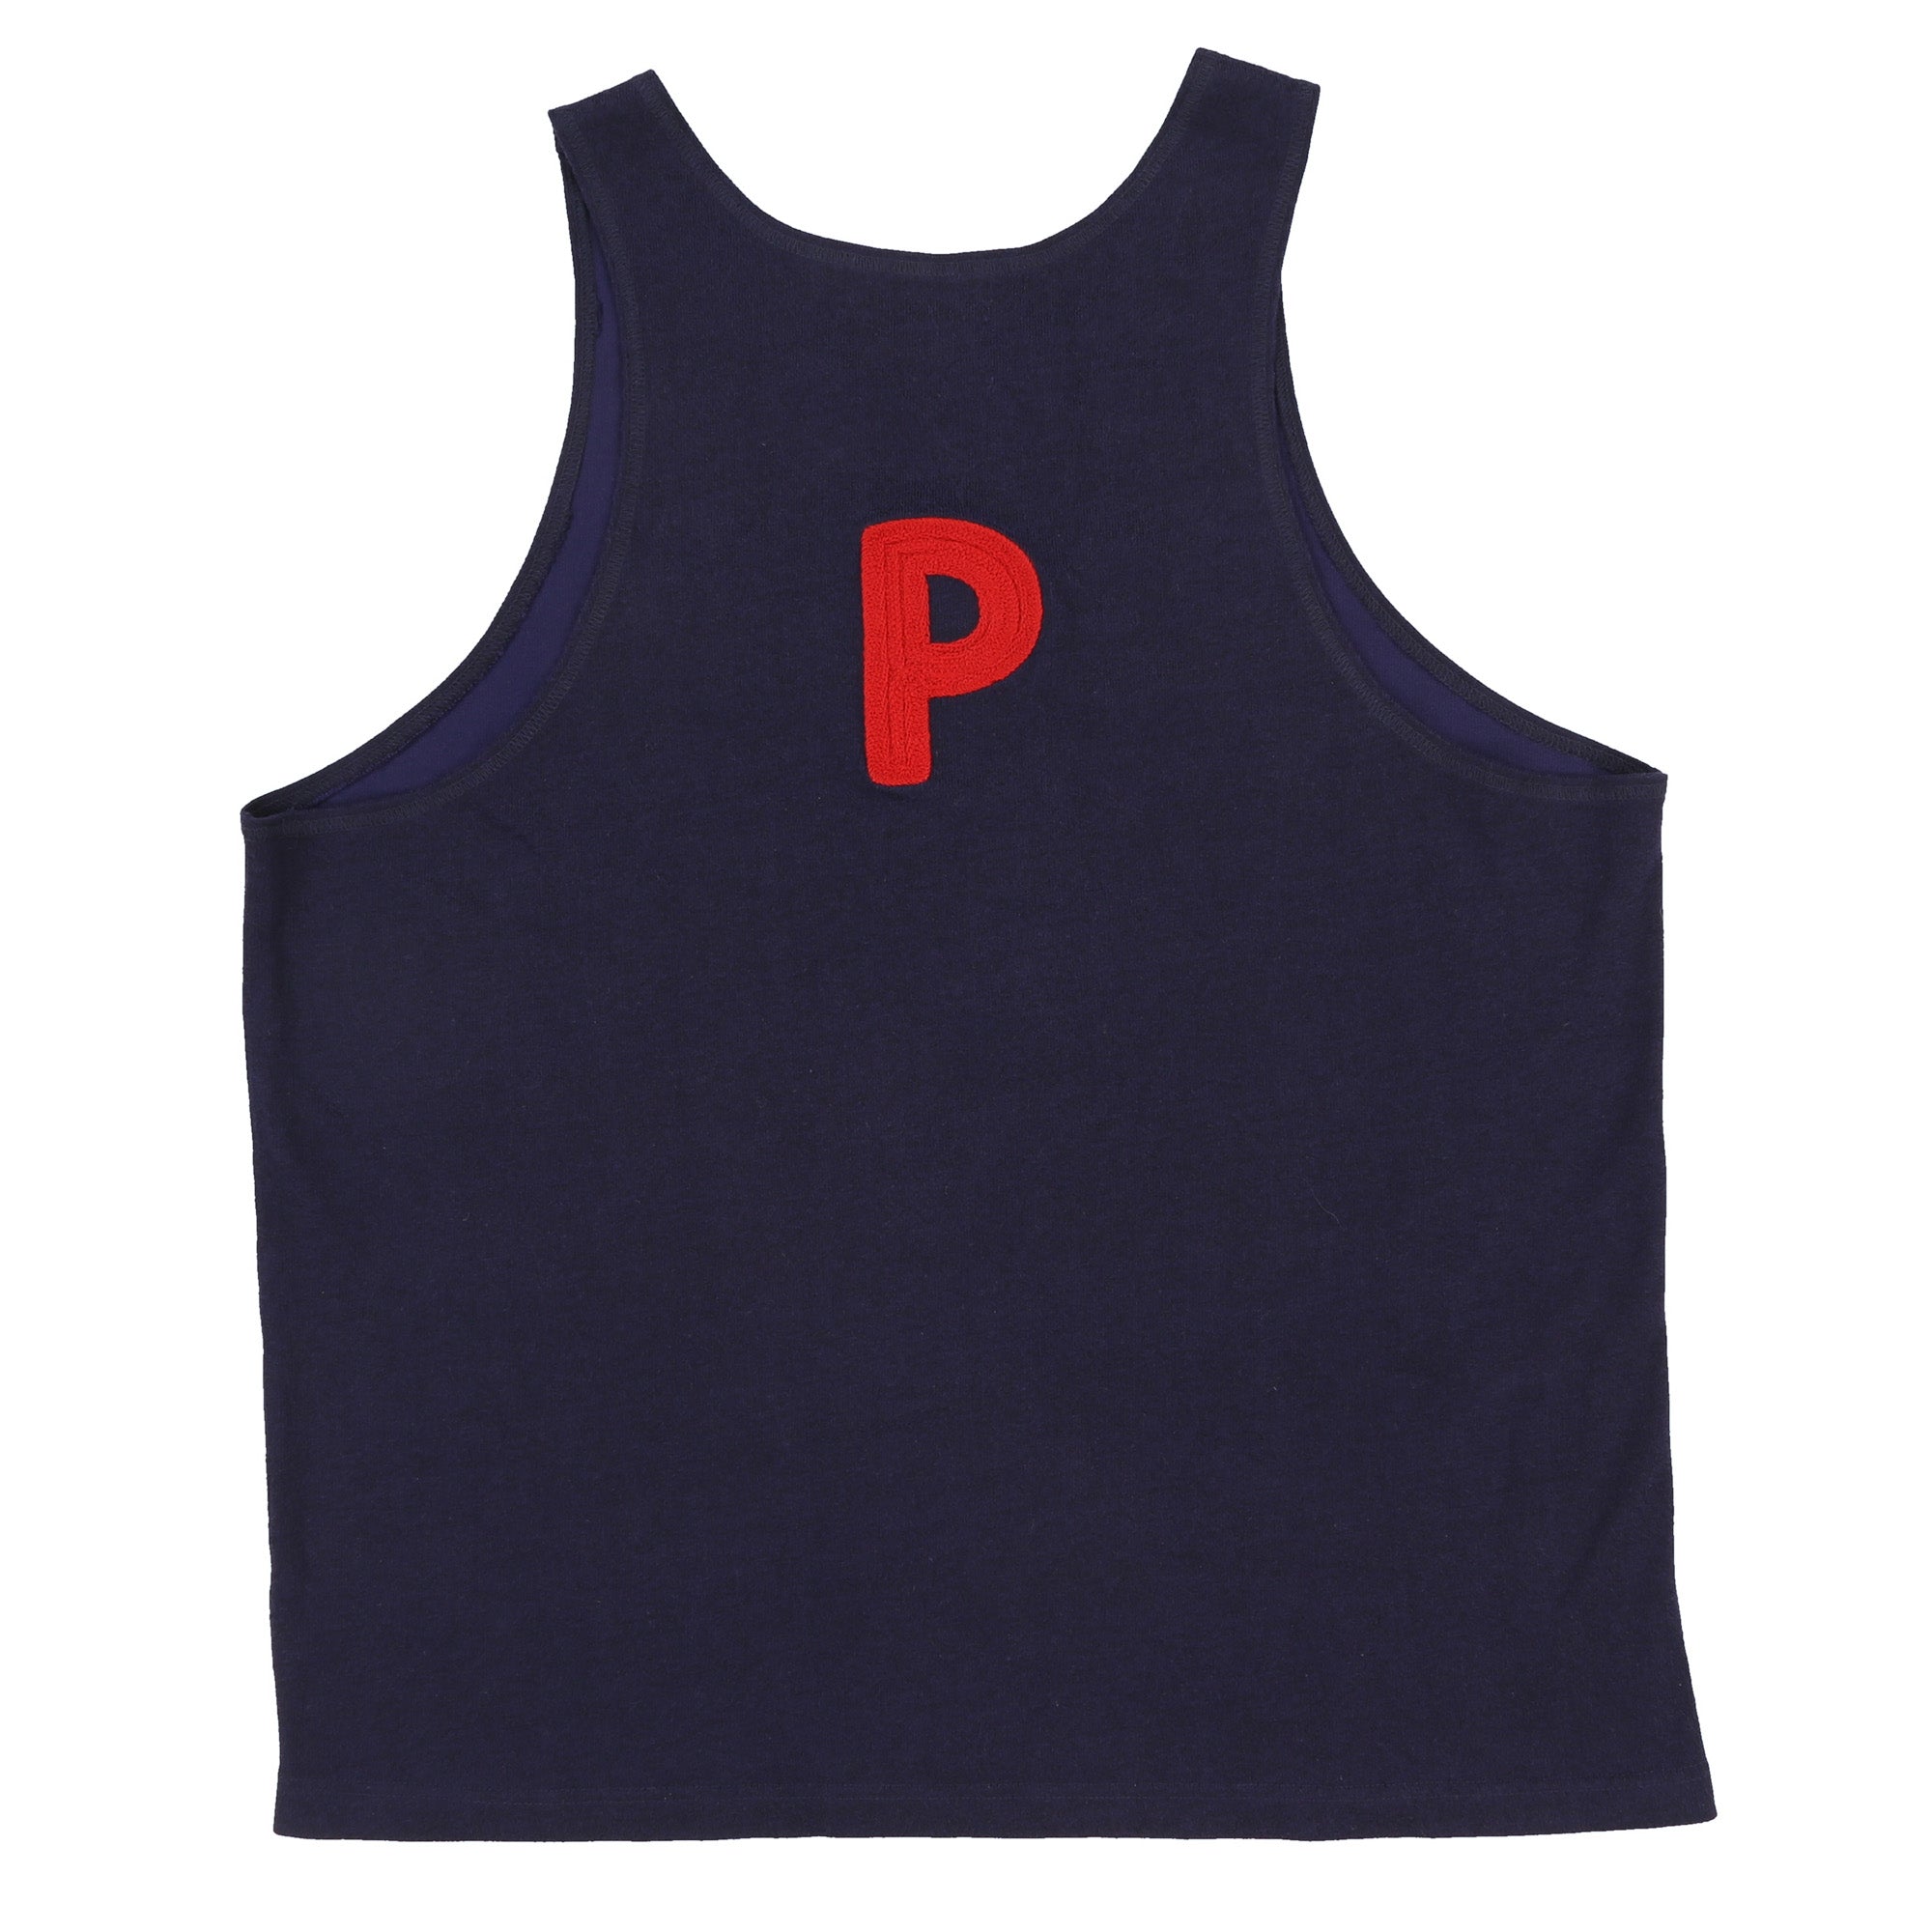 POLO SPORT ALL AMERICAN 35TH P TANK TOP // NAVY